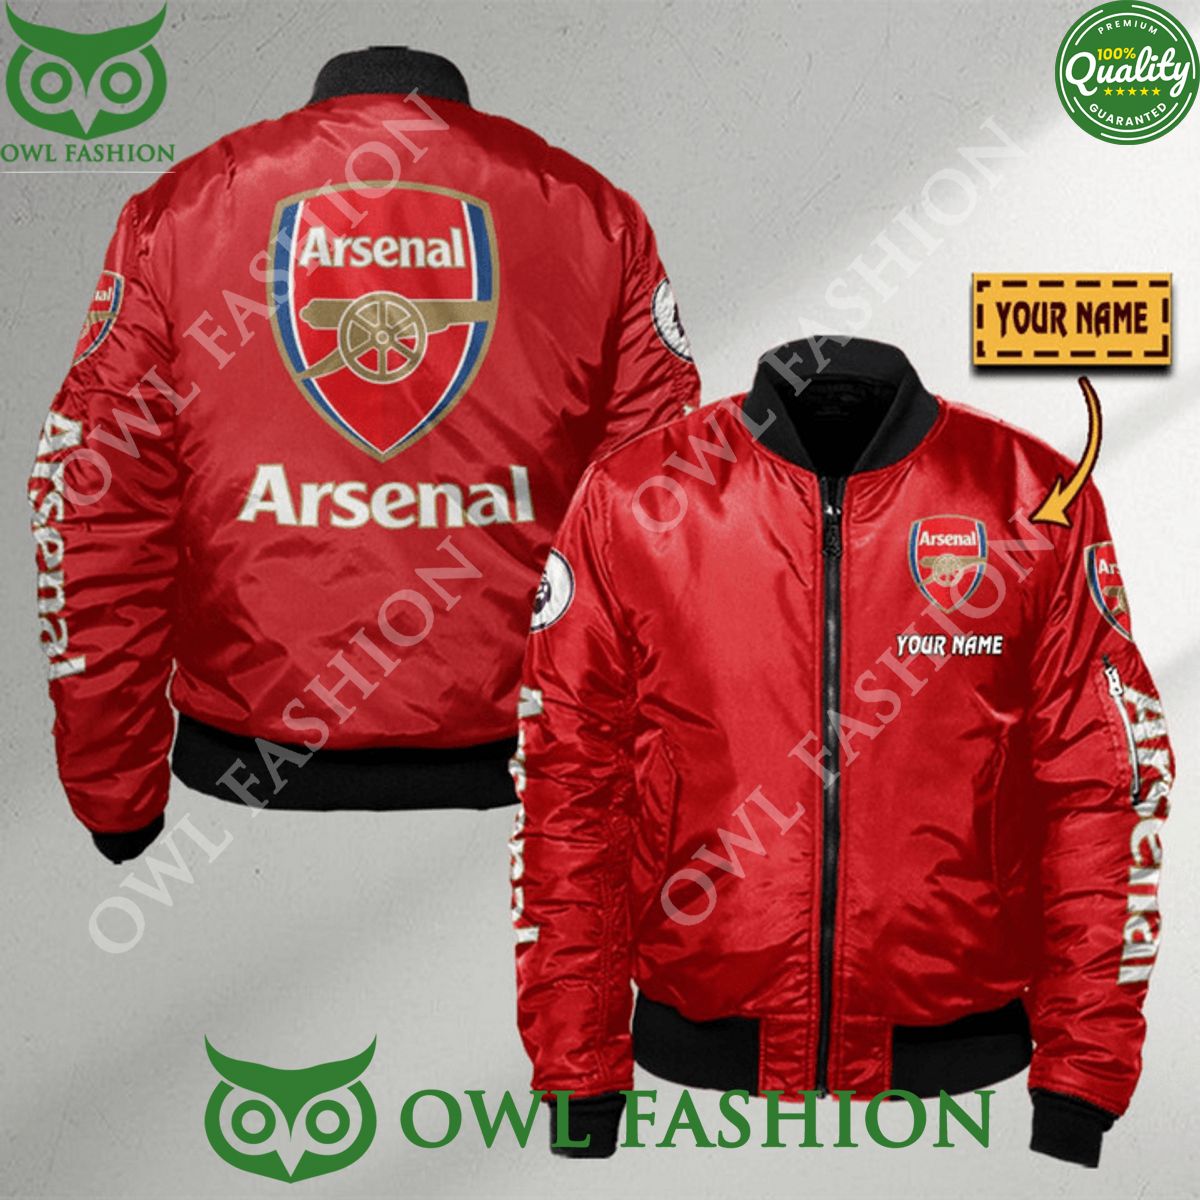 personalized arsenal fc top rankings premier league printed bomber jacket 1 tyBuT.jpg